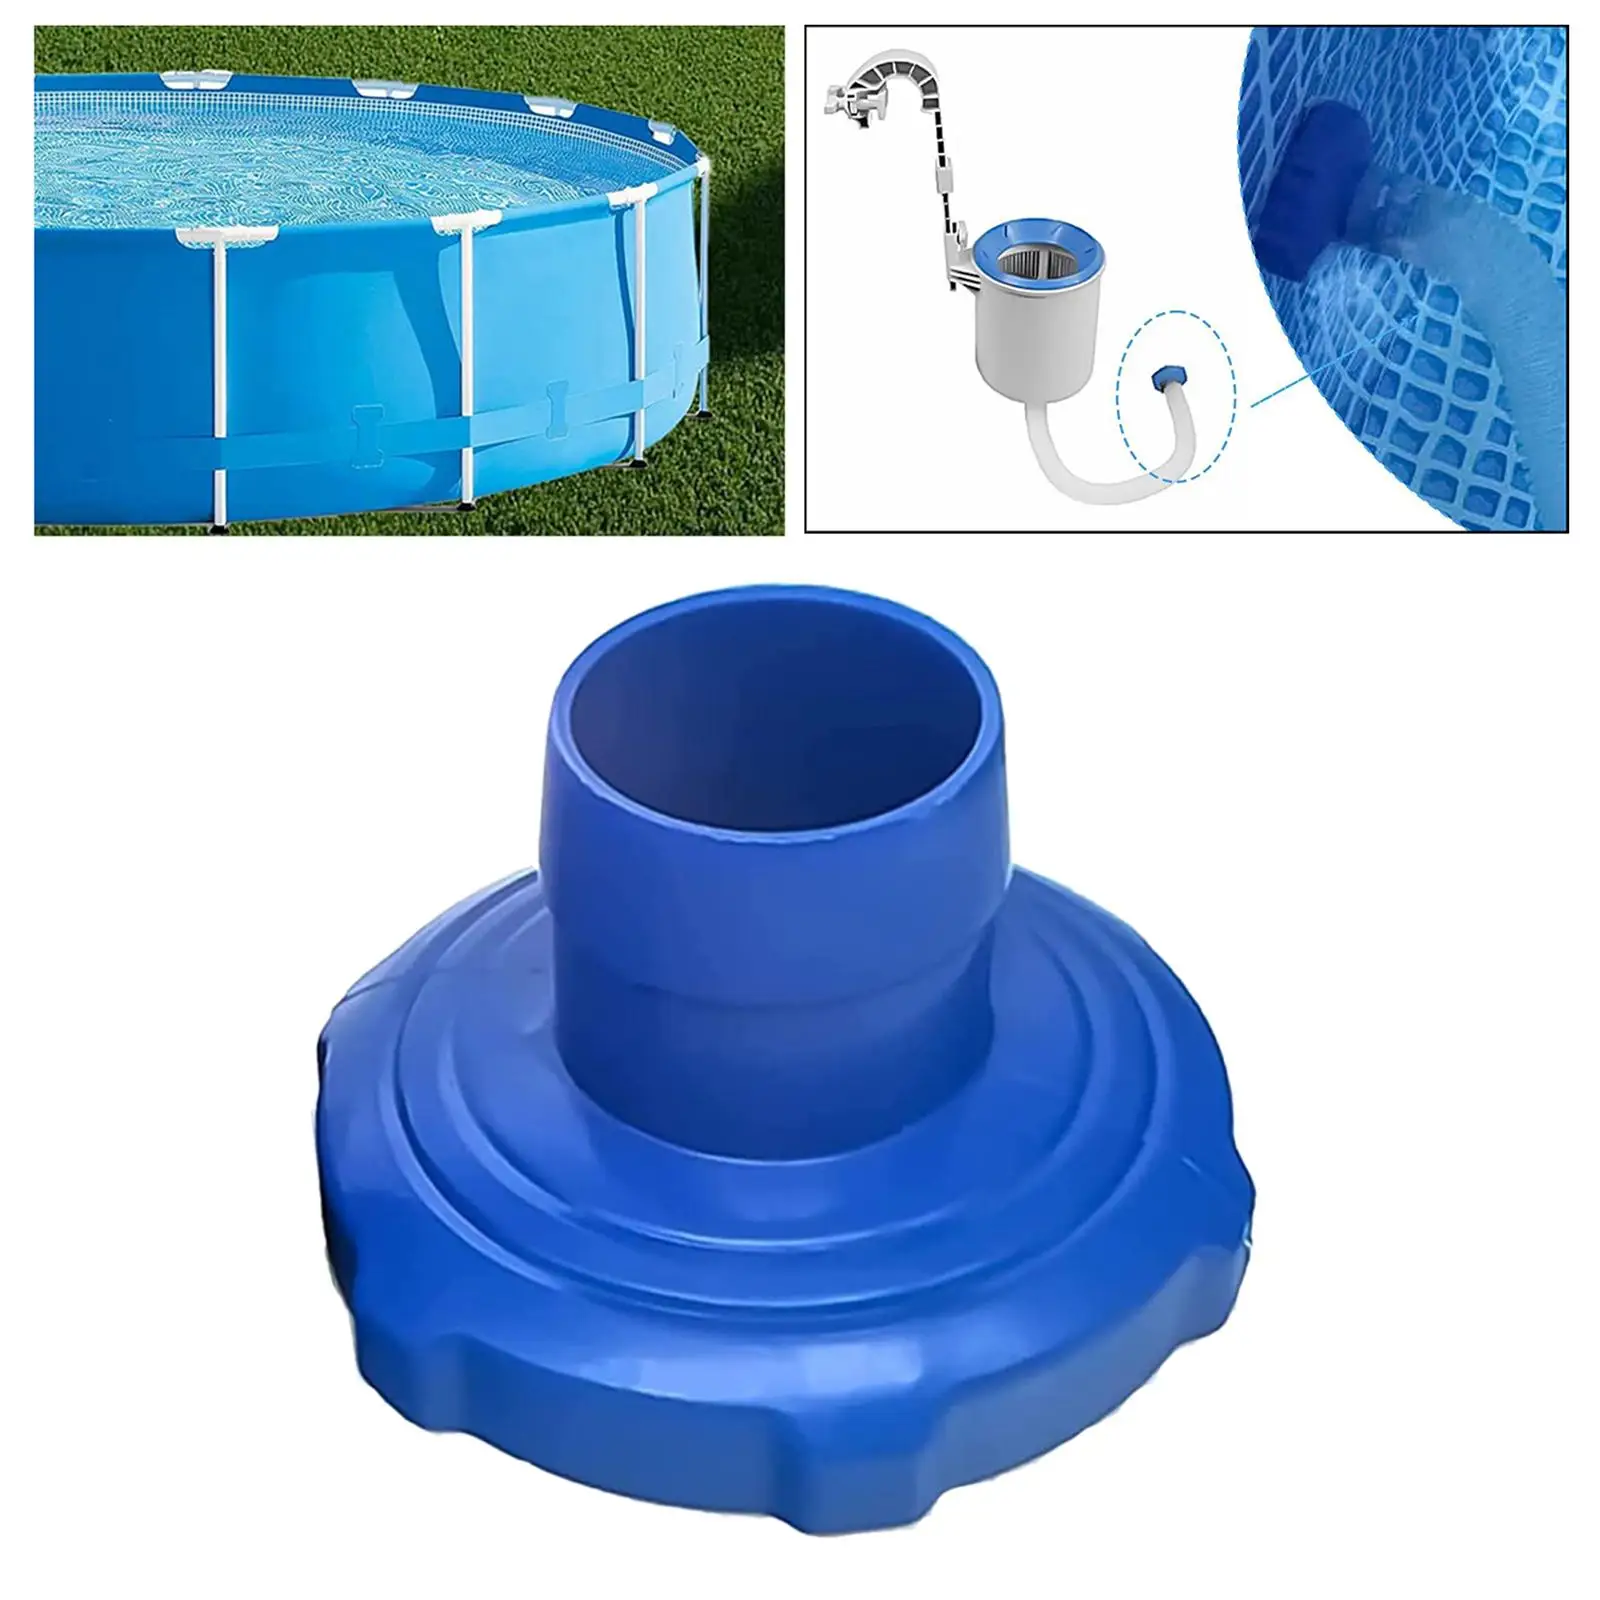 11238 Hose Adapter Pool Pool Skimmer Adapter above Ground Pool